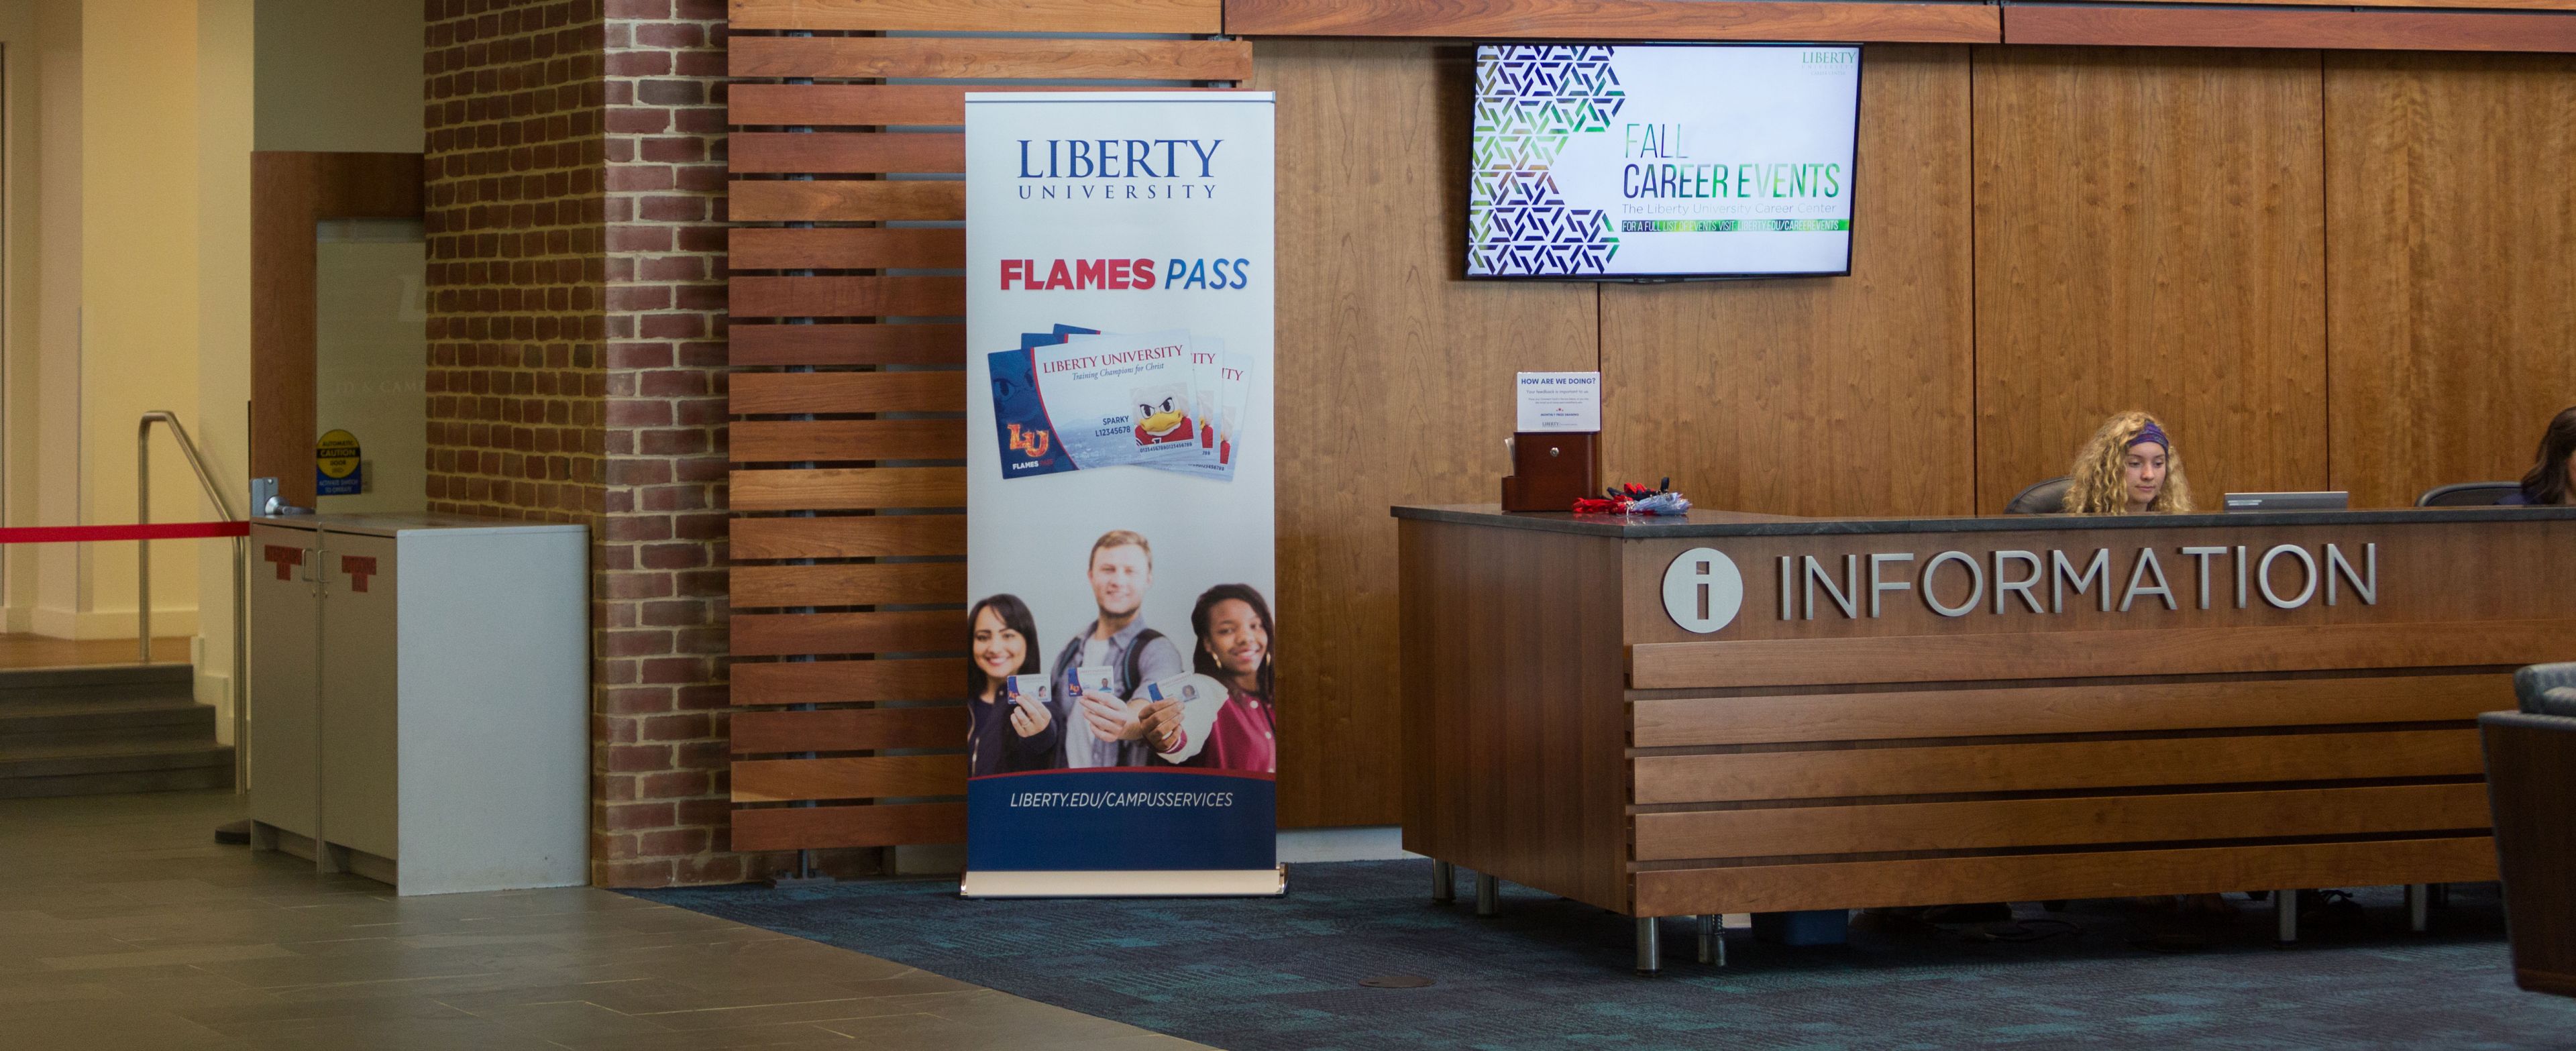 Student Financial Services Liberty University Online